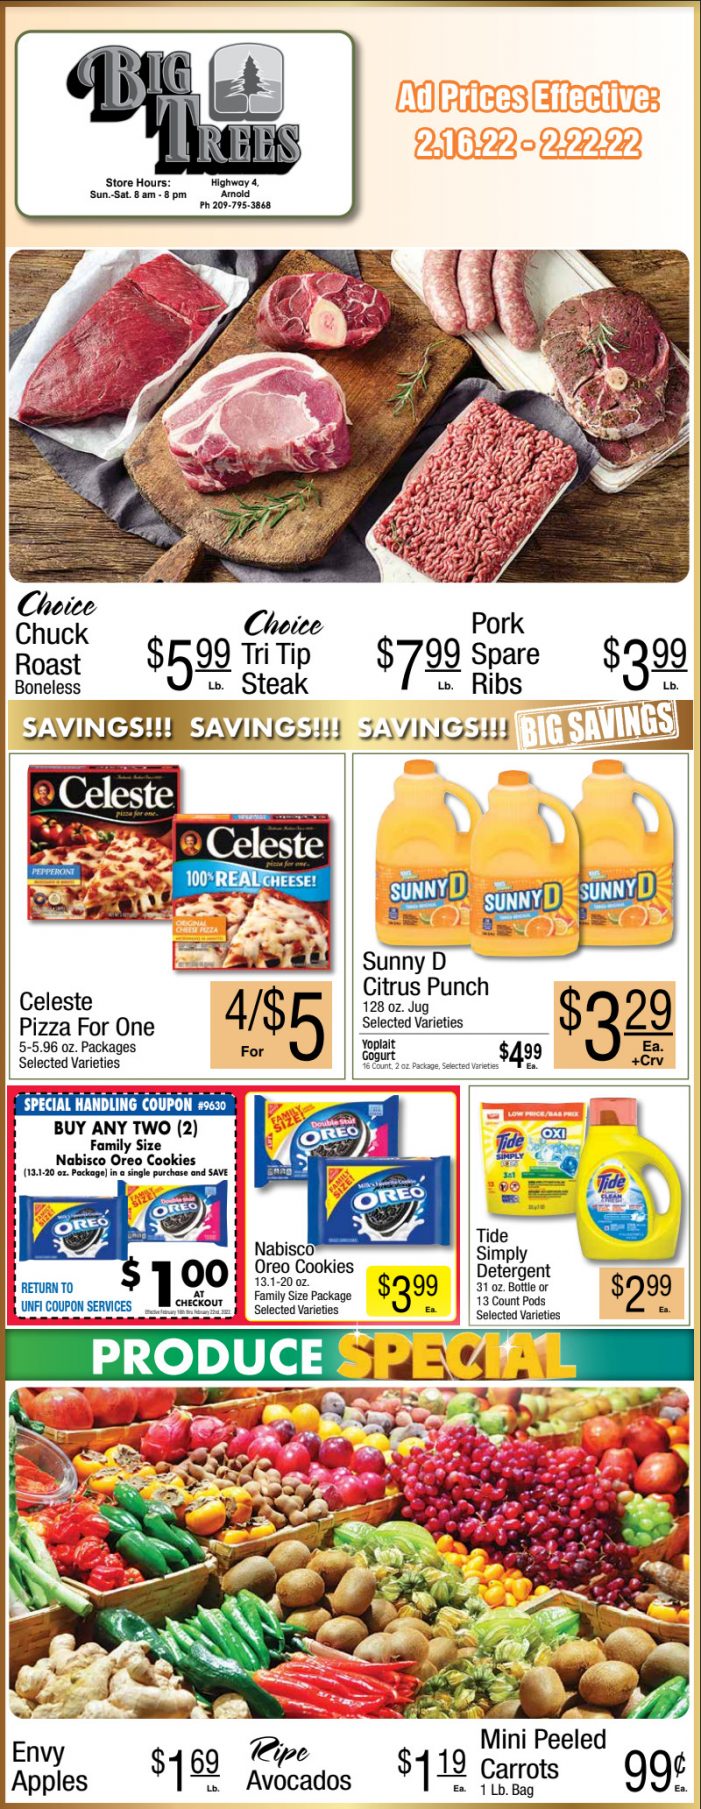 Big Trees Market Weekly Ad & Grocery Specials February 16th Through The 22nd! Shop Local & Save!